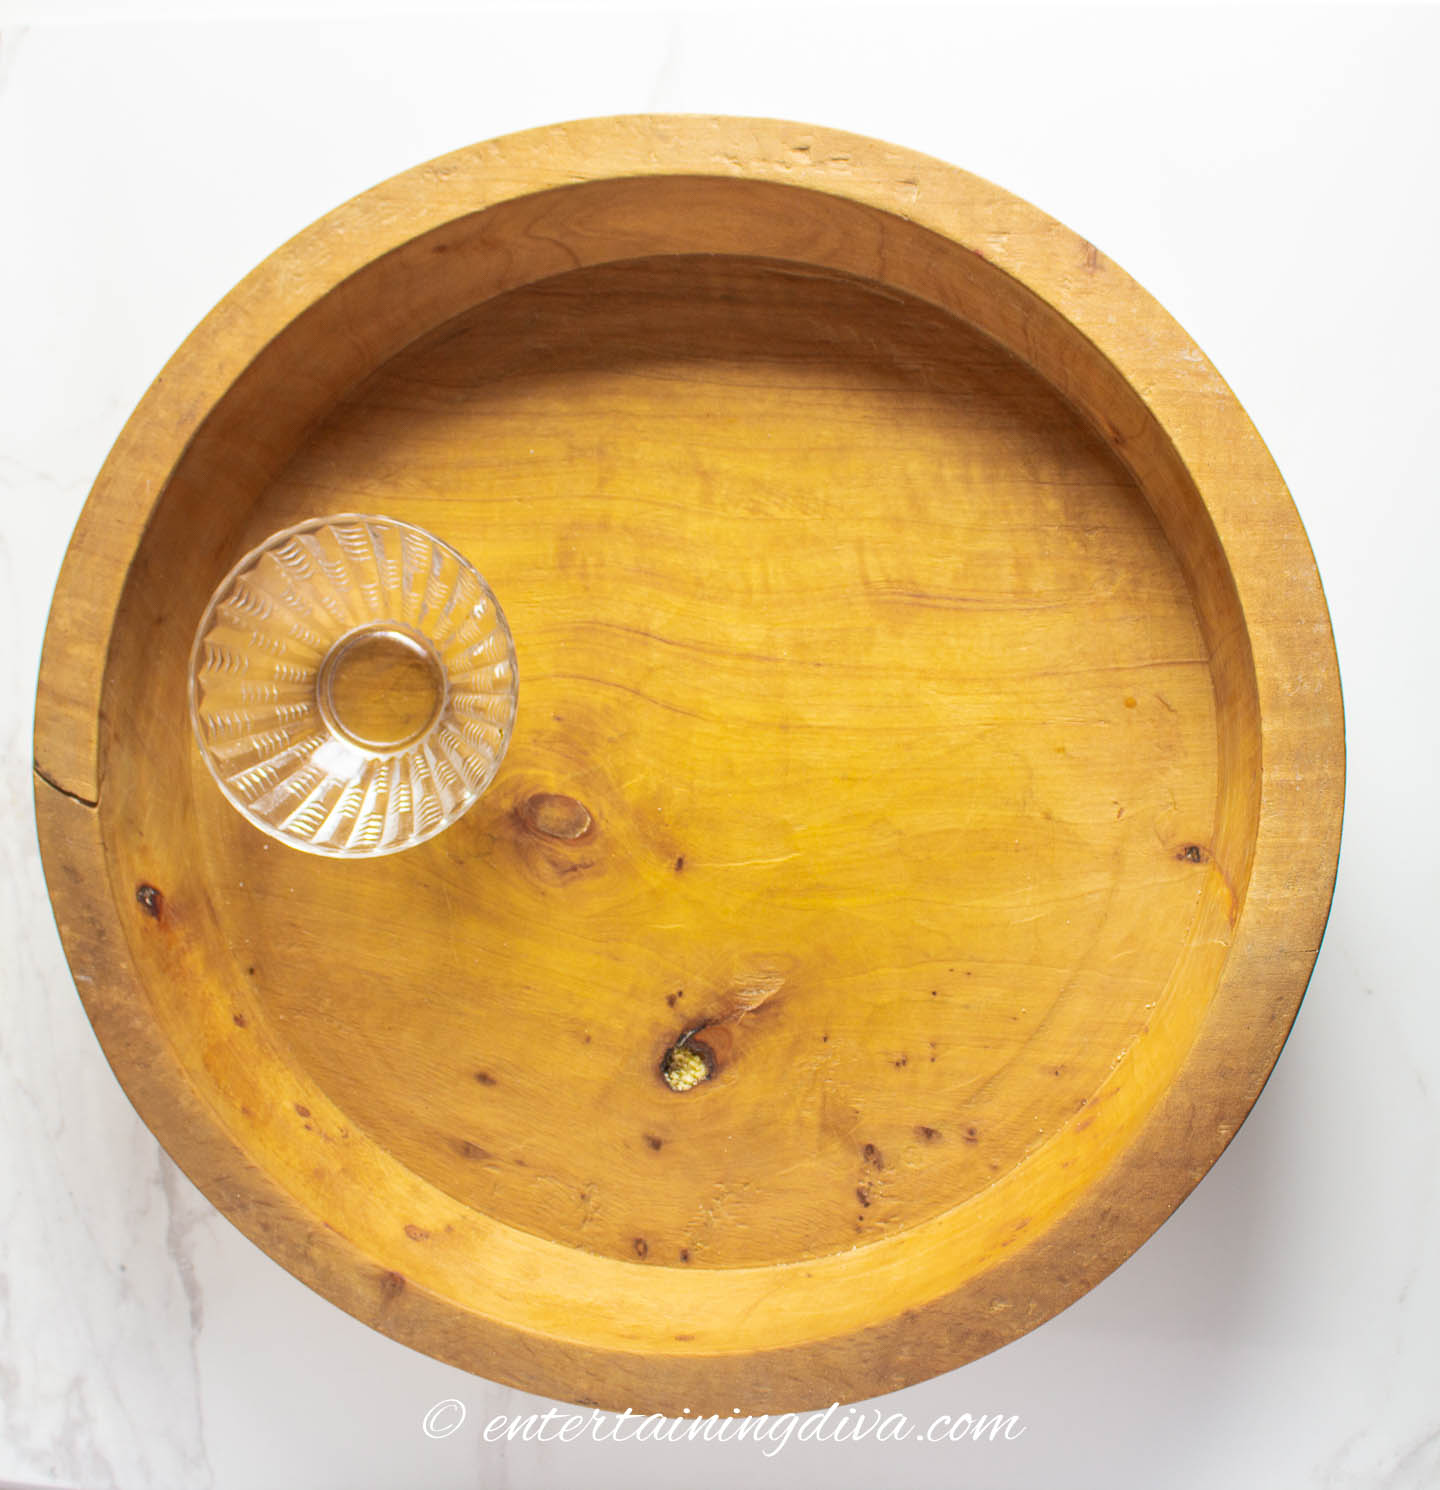 A wooden pie plate used as a charcuterie board with a small bowl on it